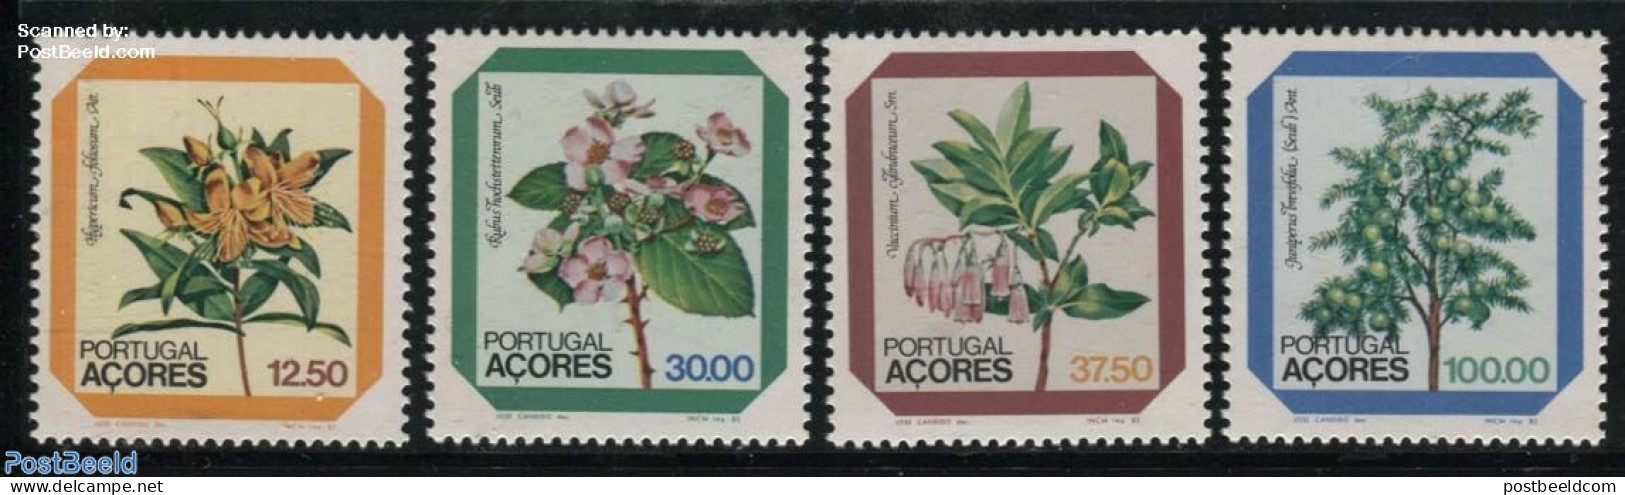 Azores 1983 Wild Flowers 4v, Mint NH, Nature - Flowers & Plants - Azores